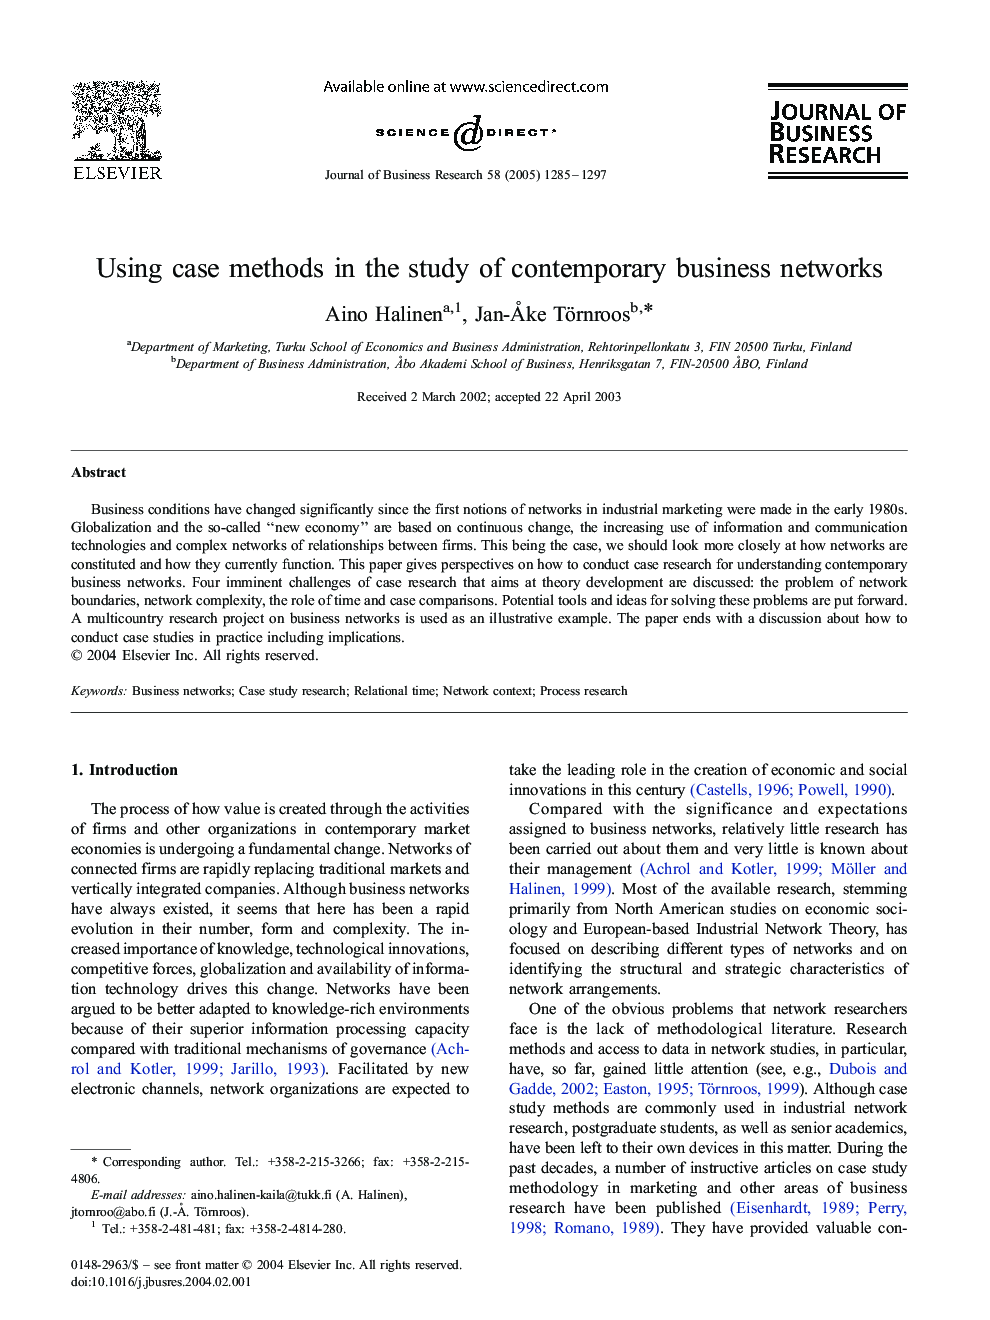 Using case methods in the study of contemporary business networks